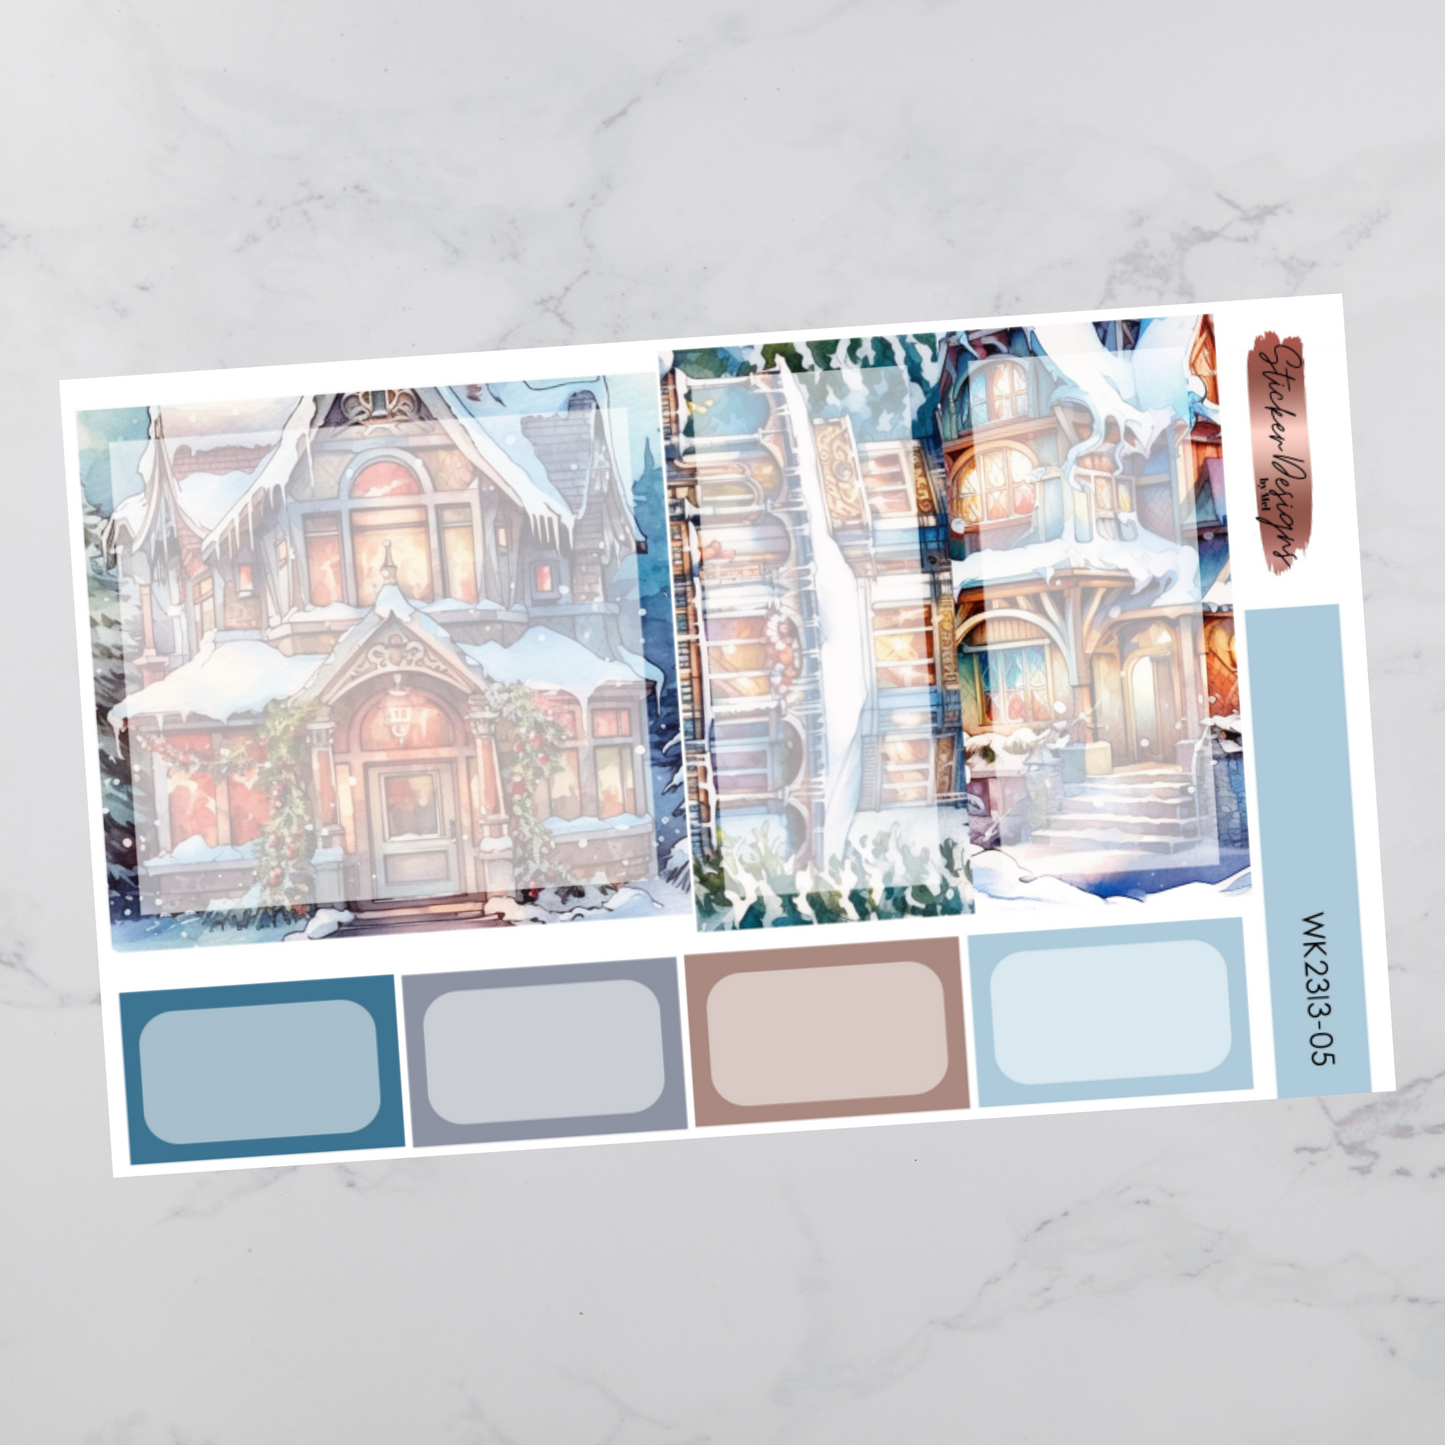 Weekly Kit 2313 - Winter Houses - Vertical Layout